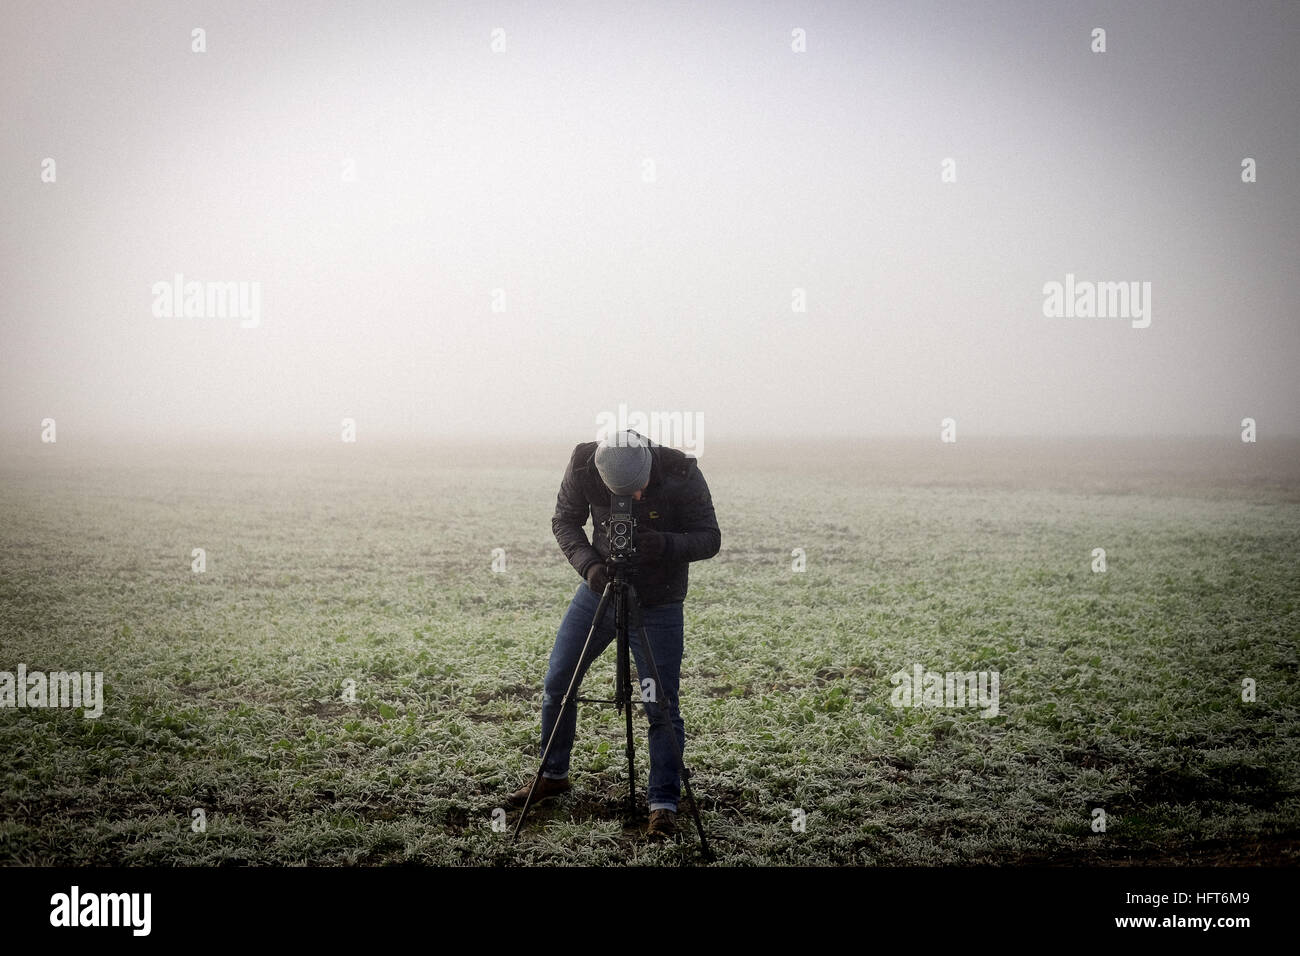 A photographer braves the elements to capture a photograph Stock Photo